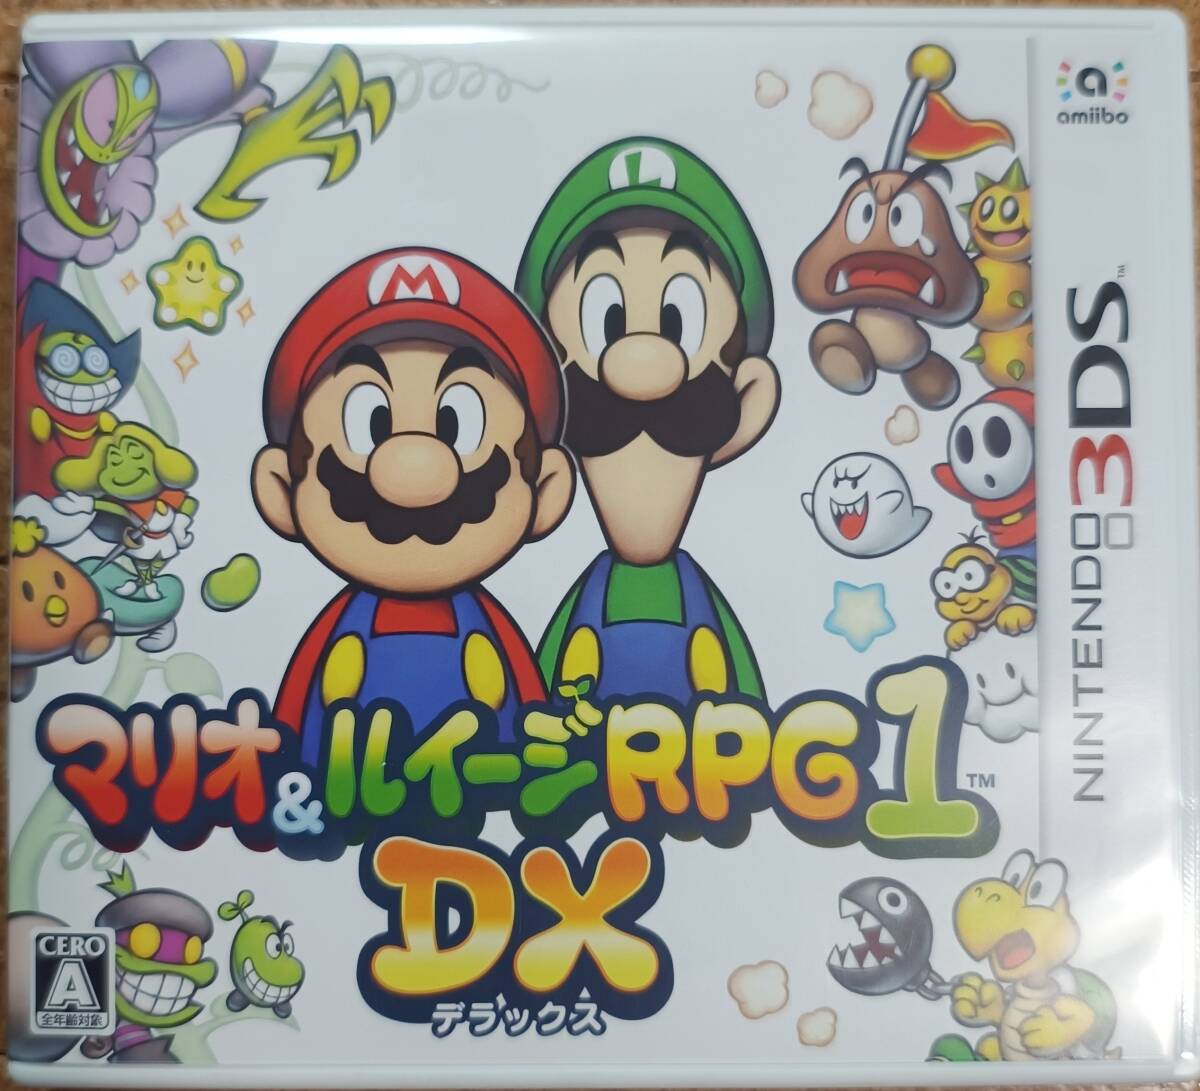  free shipping *[3DS] Mario & Louis -jiRPG1 DX